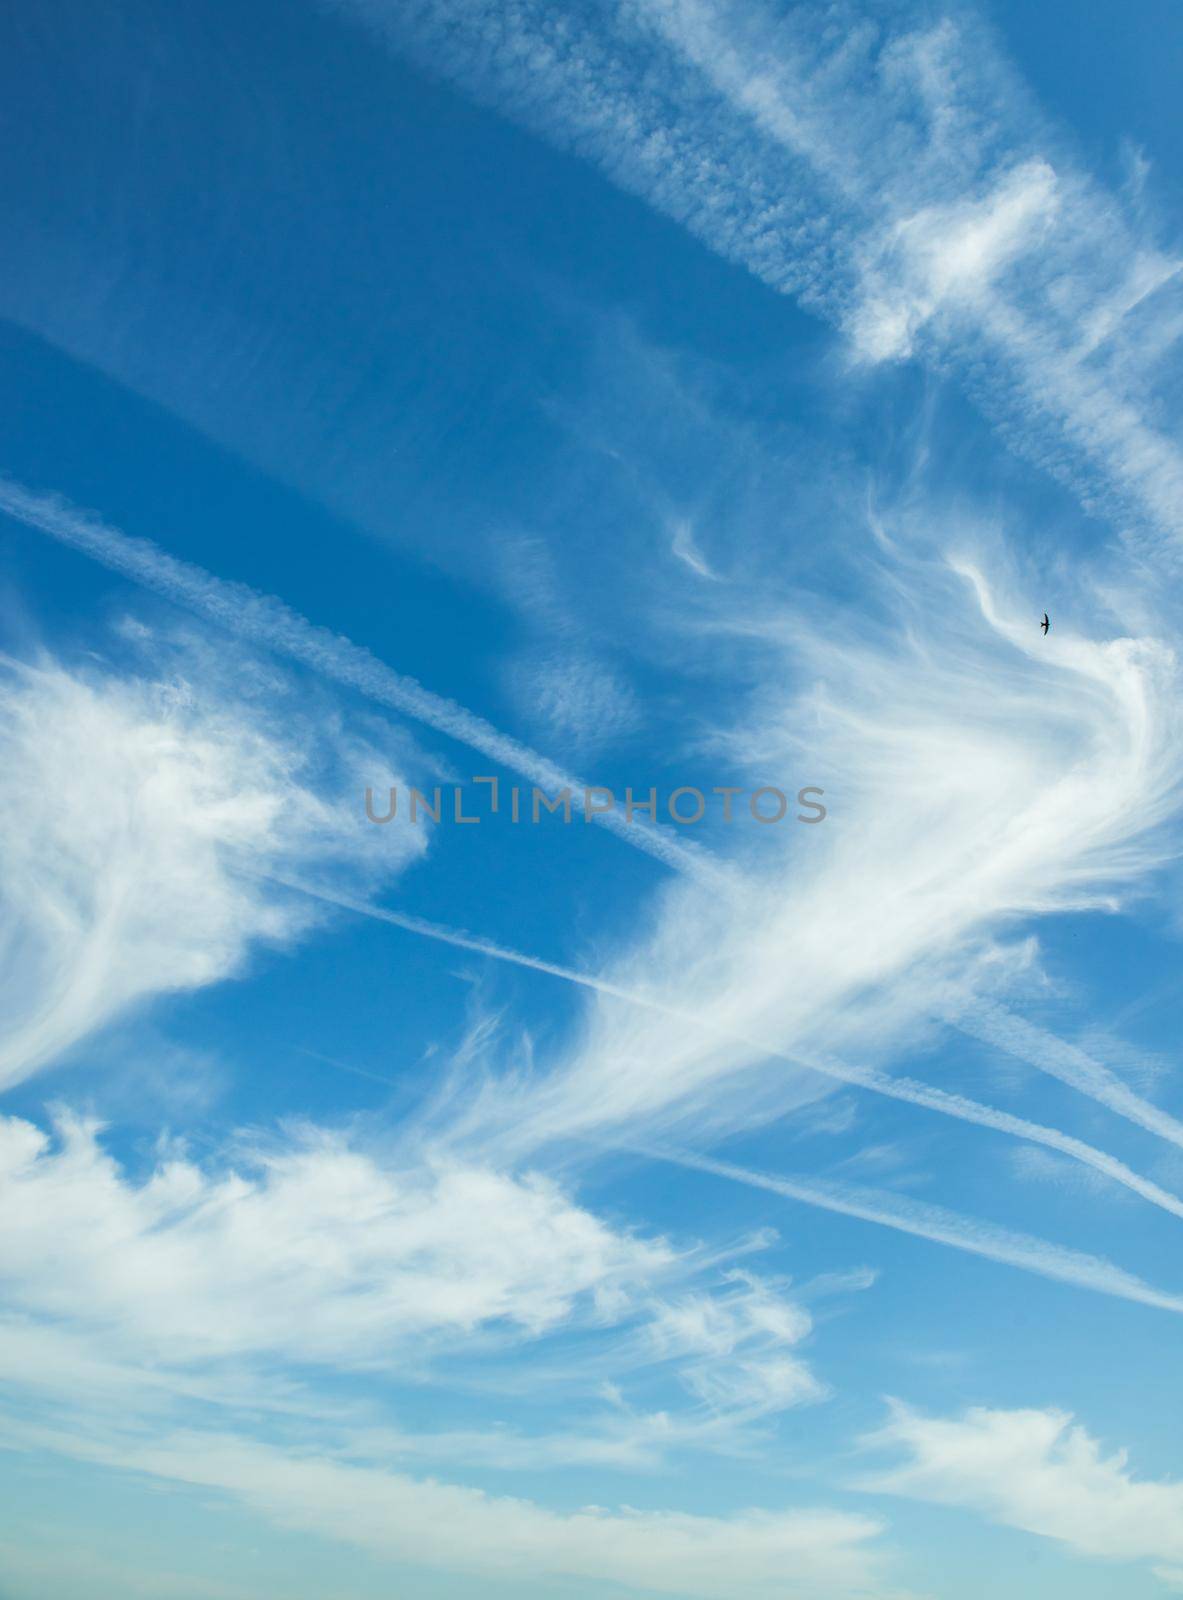 White clouds in a blue sky. Great vertical background